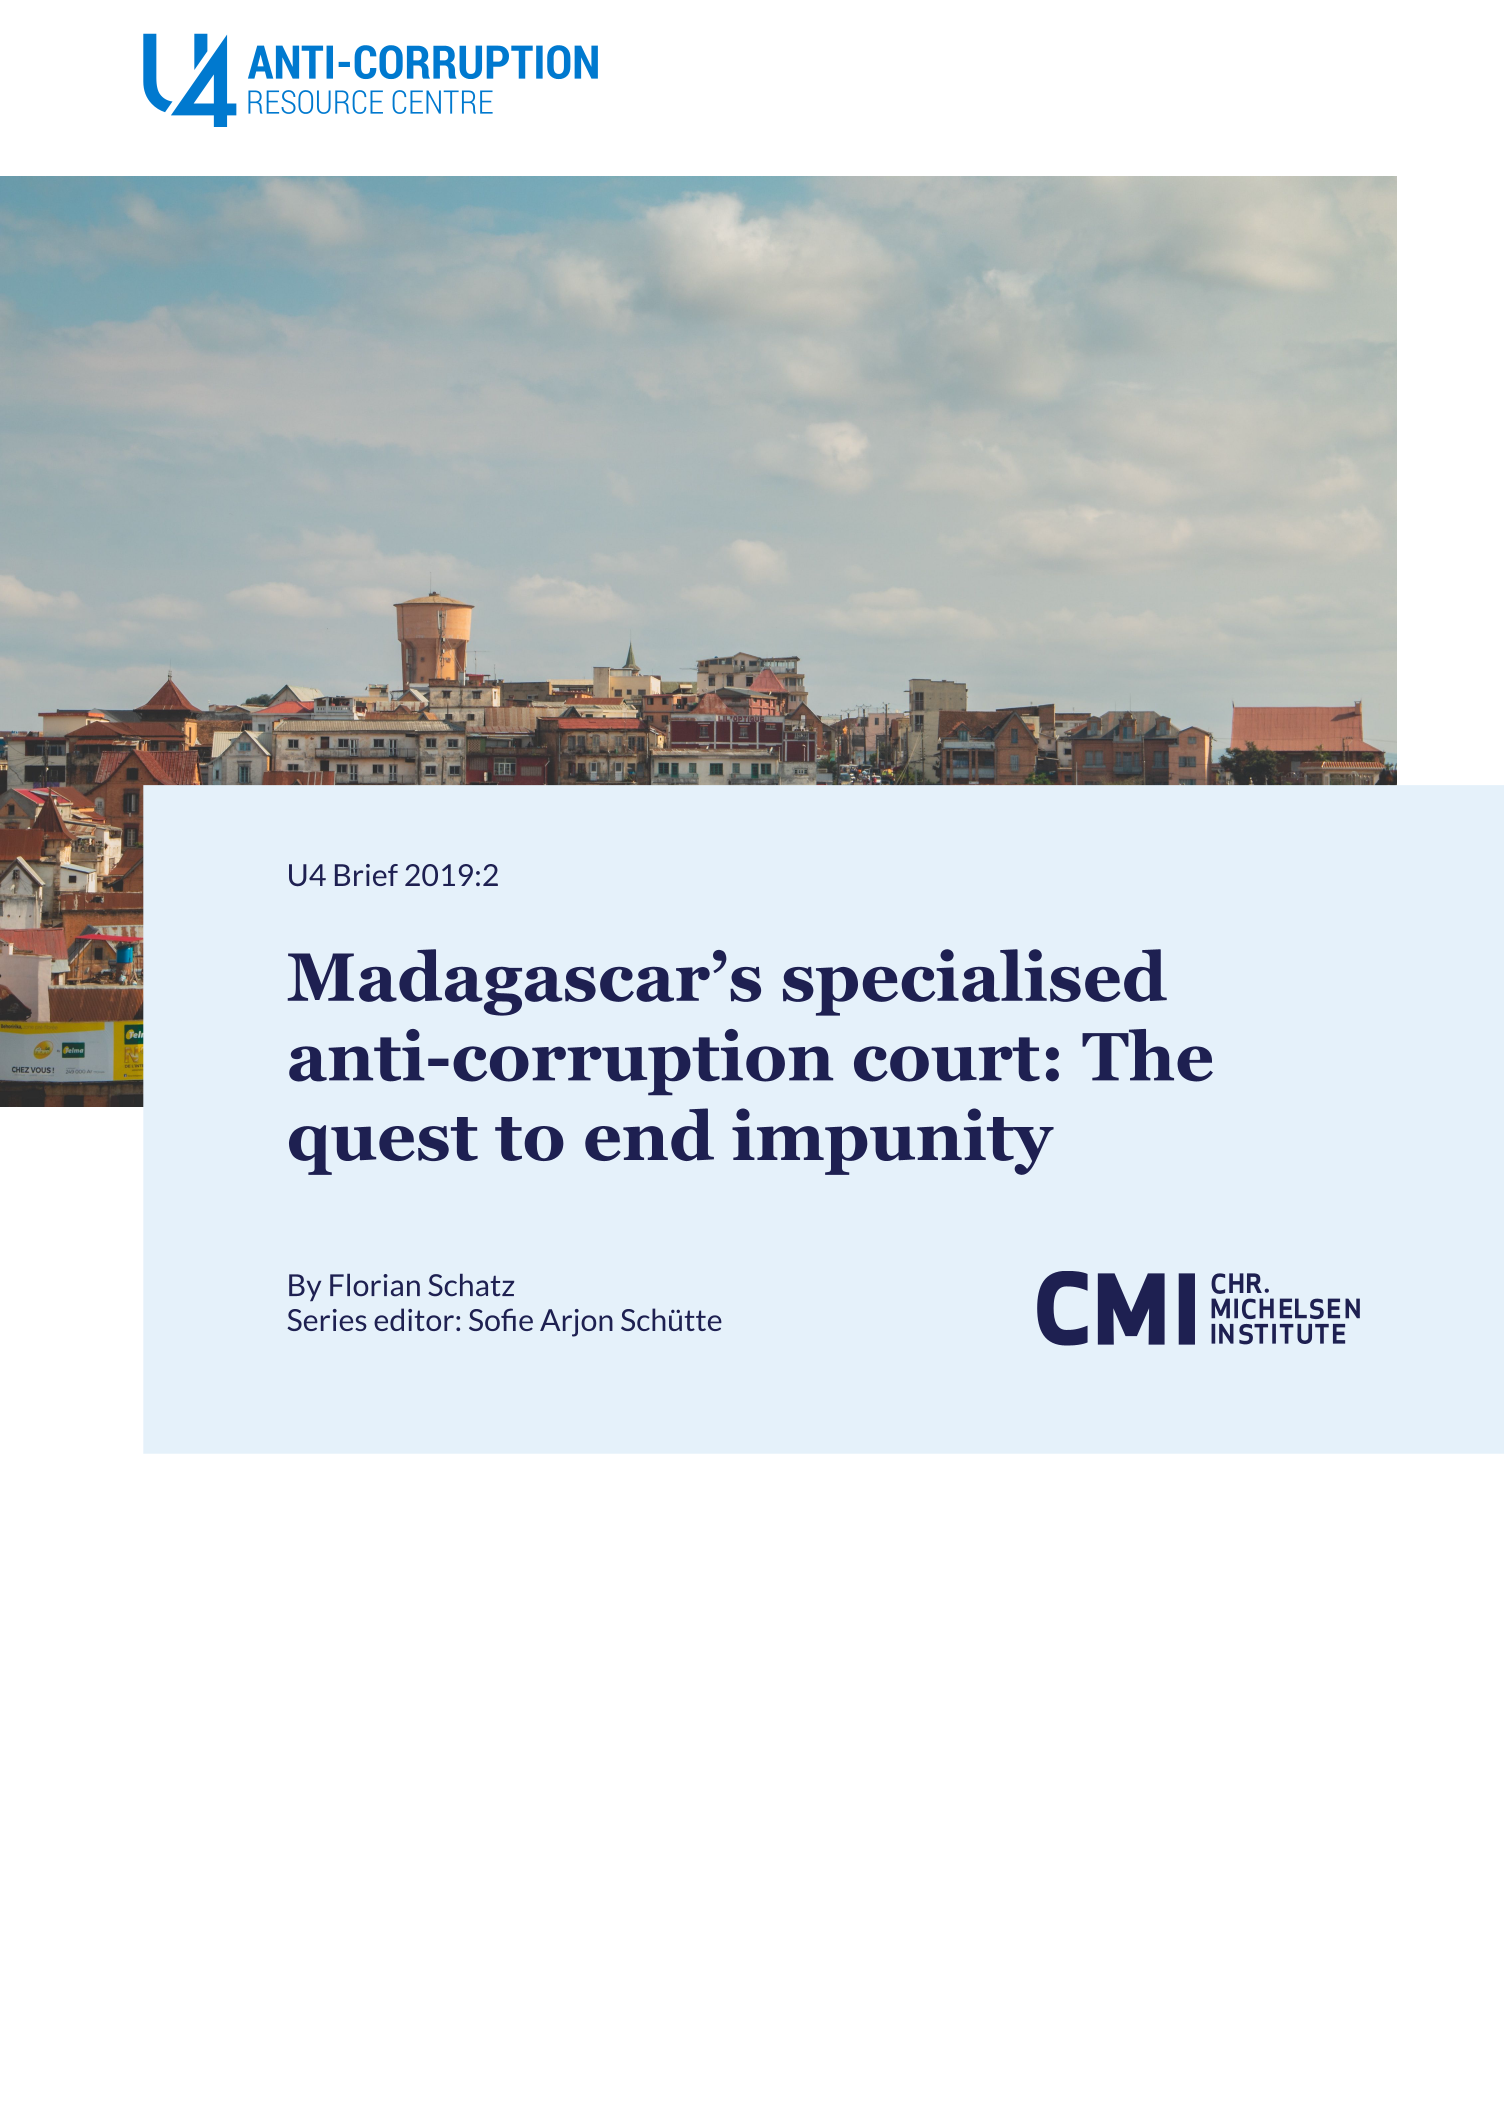 Madagascar’s specialised anti-corruption court: The quest to end impunity